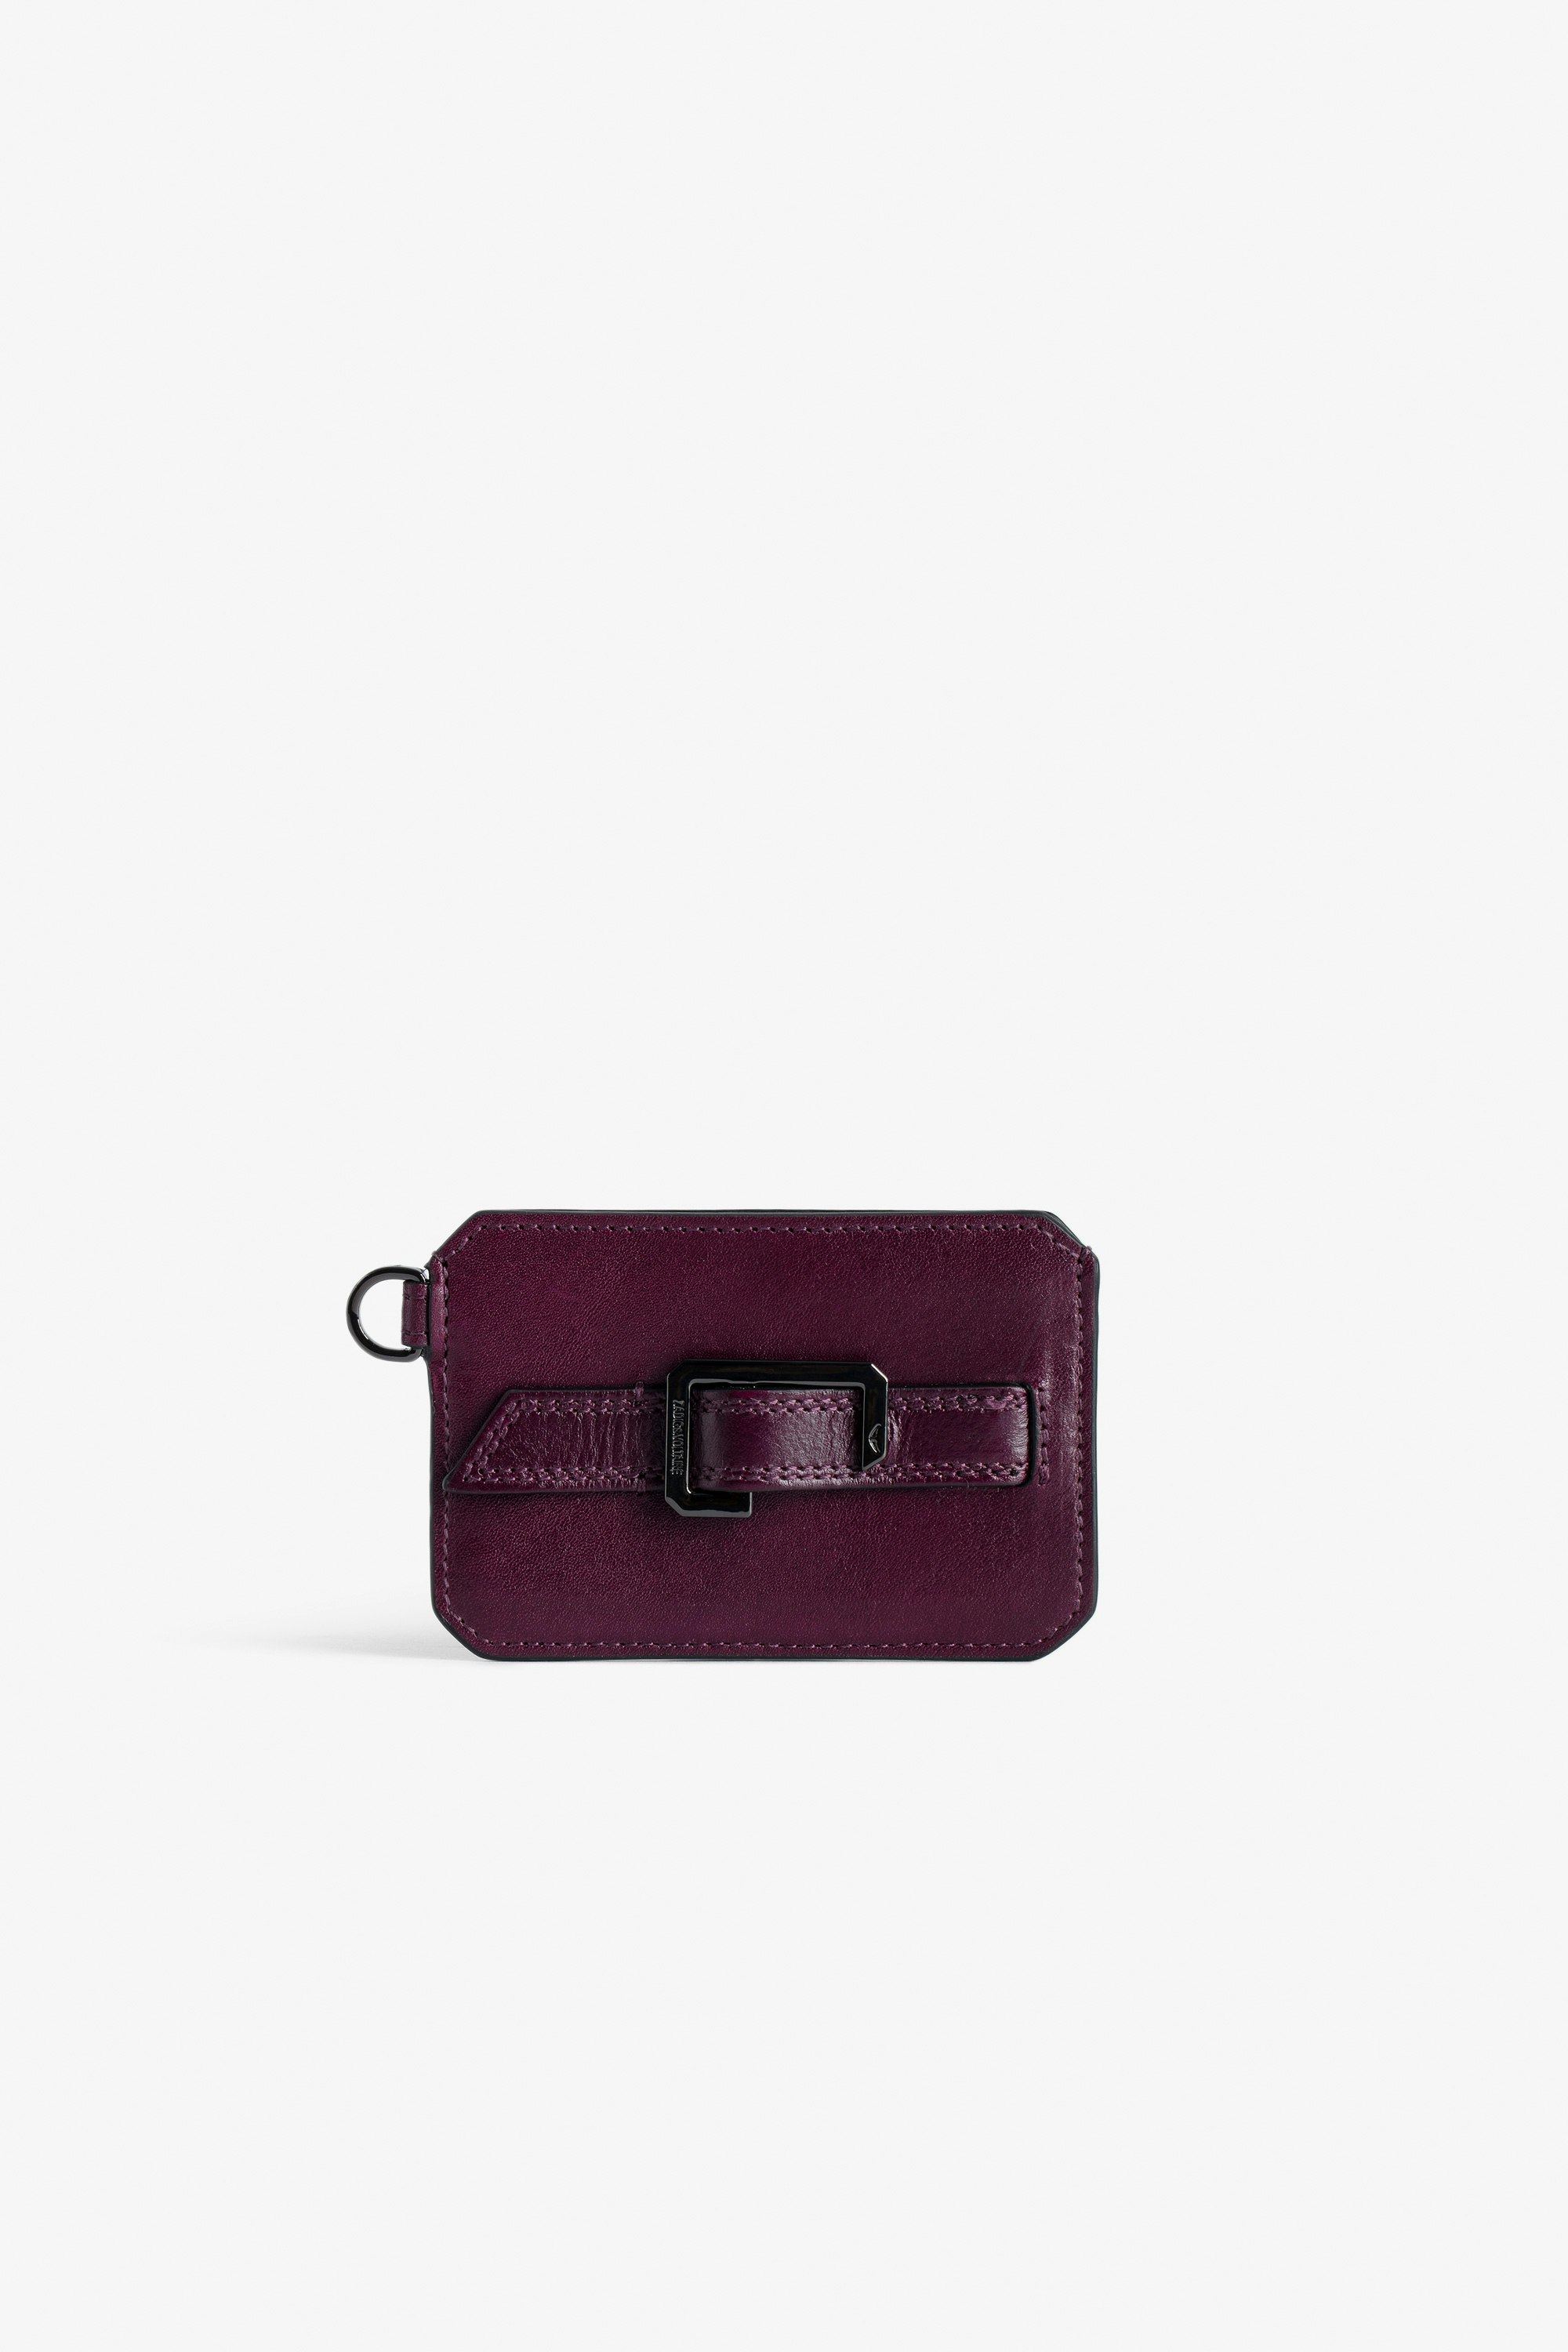 Le Cecilia Pass 財布 - Women’s burgundy leather card holder with C buckle.